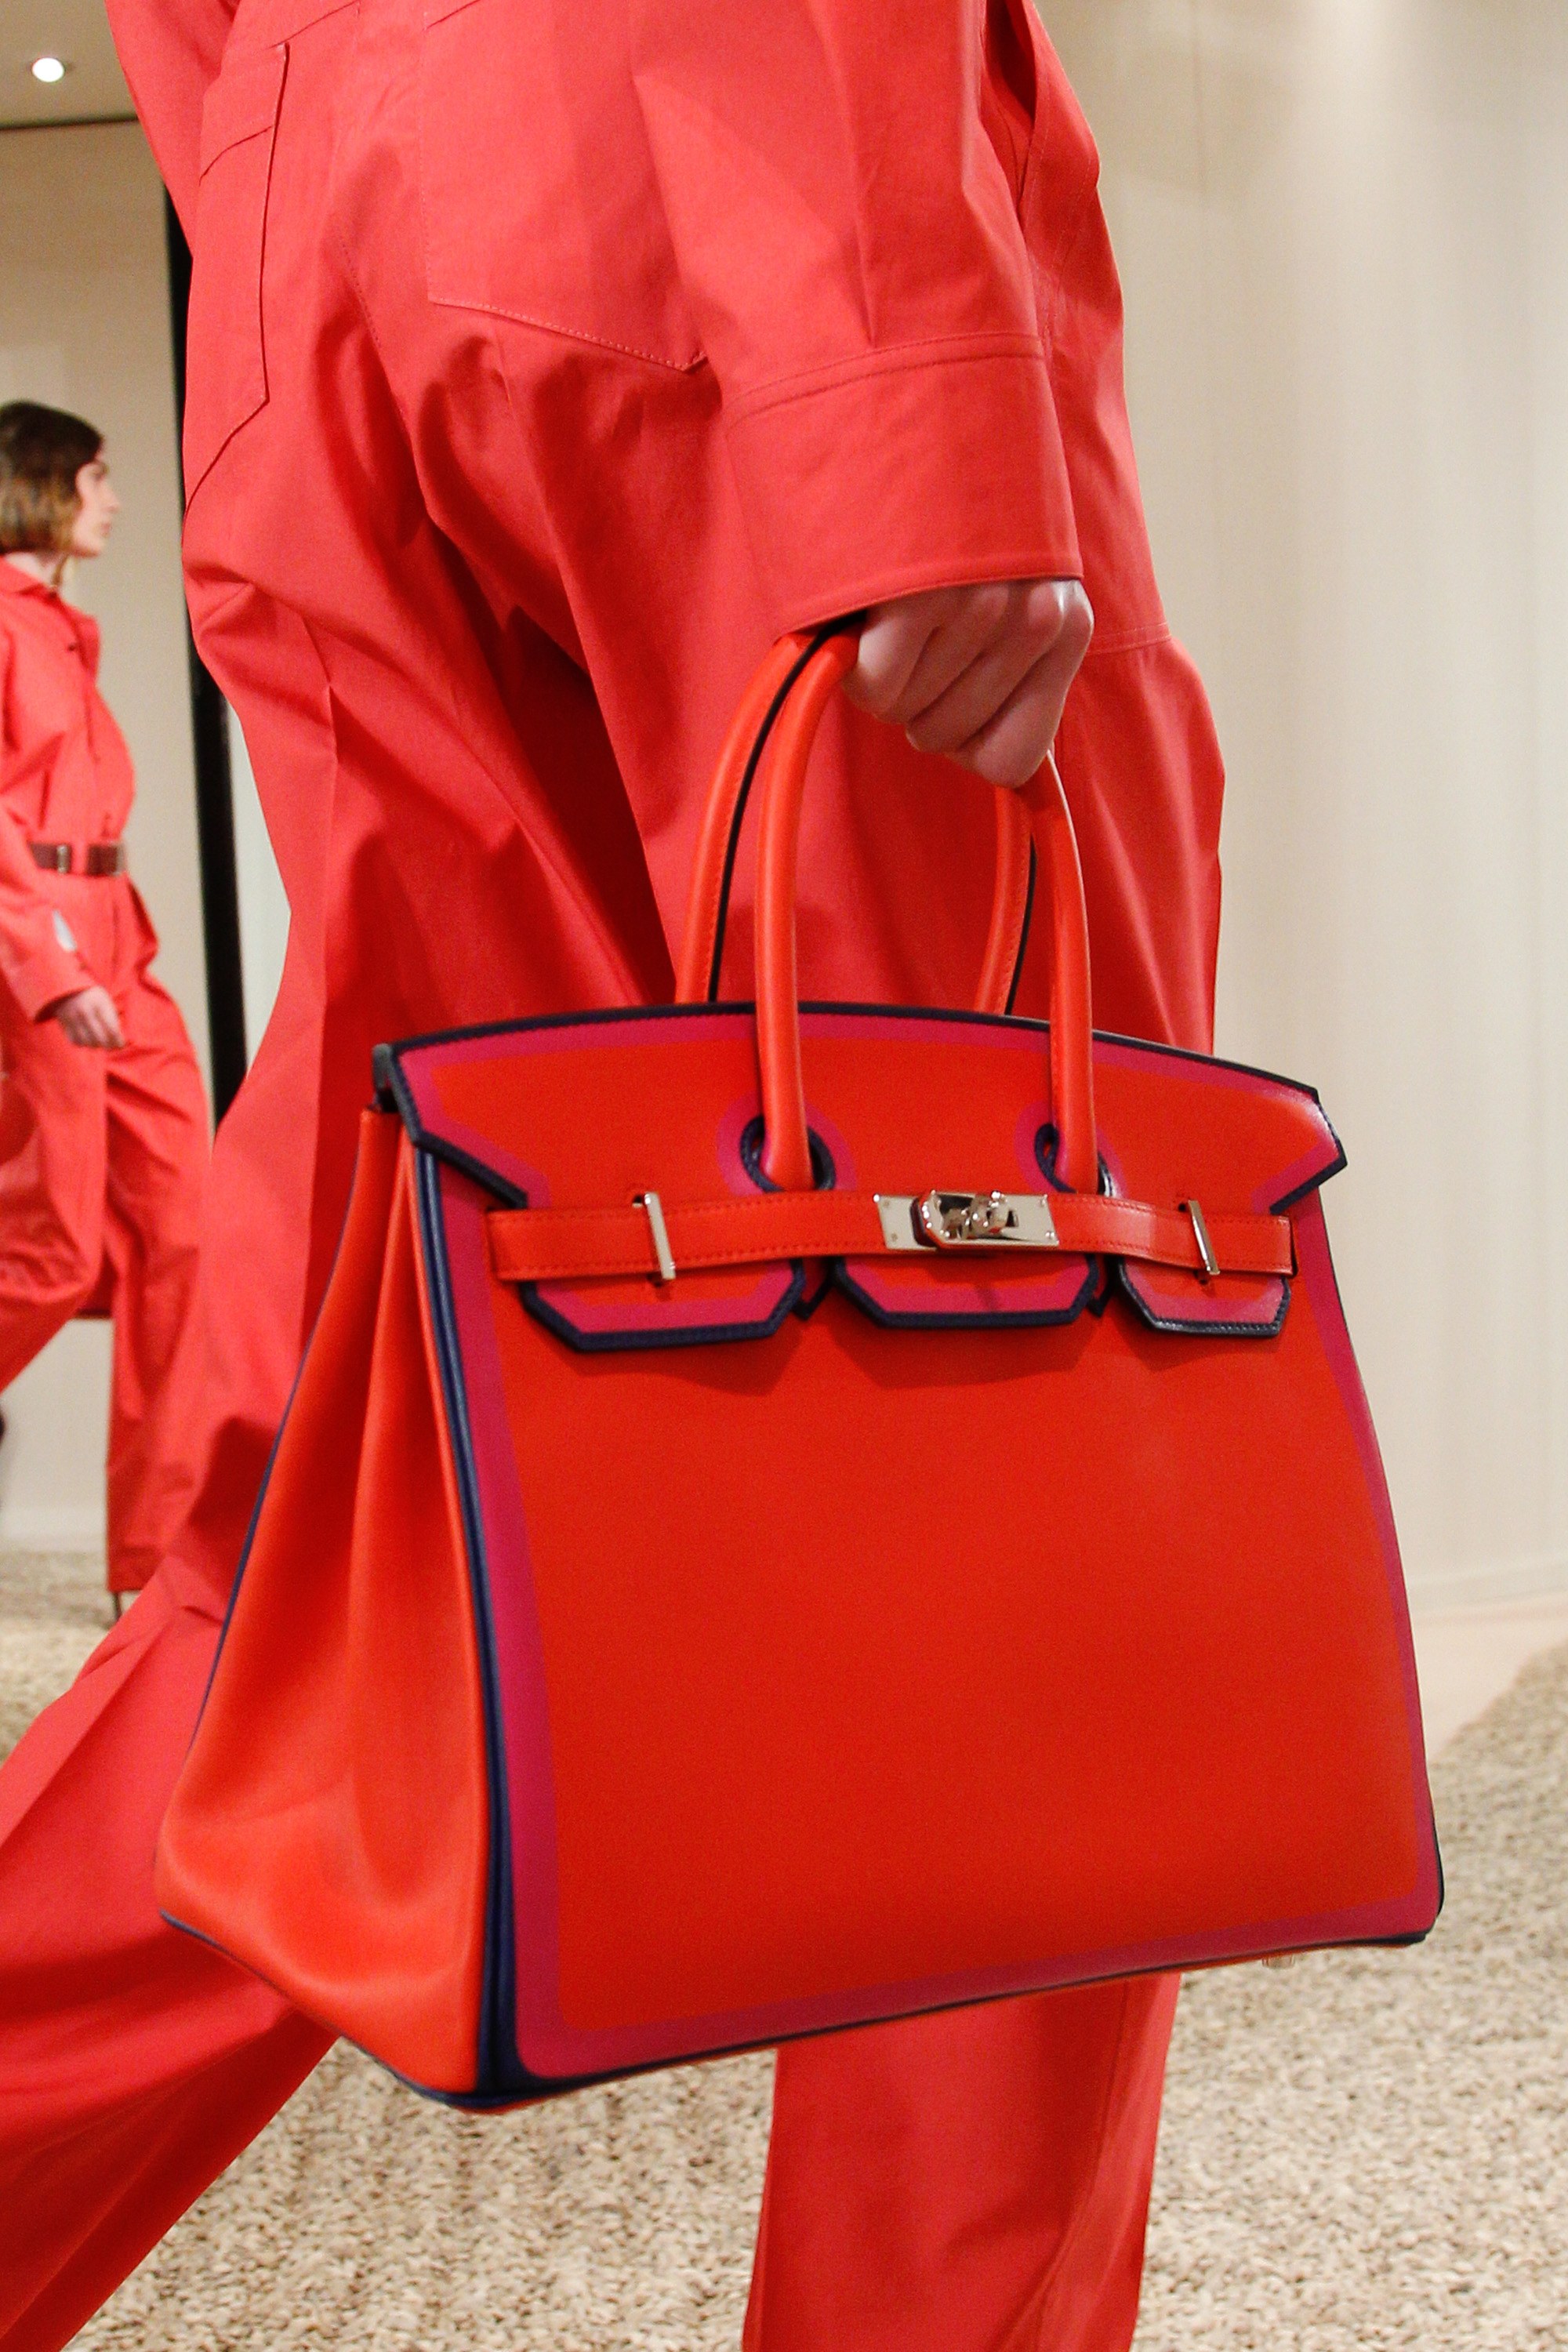 Hermes Resort 2018 Runway Bag Collection Includes Birkin with Piping – Spotted Fashion